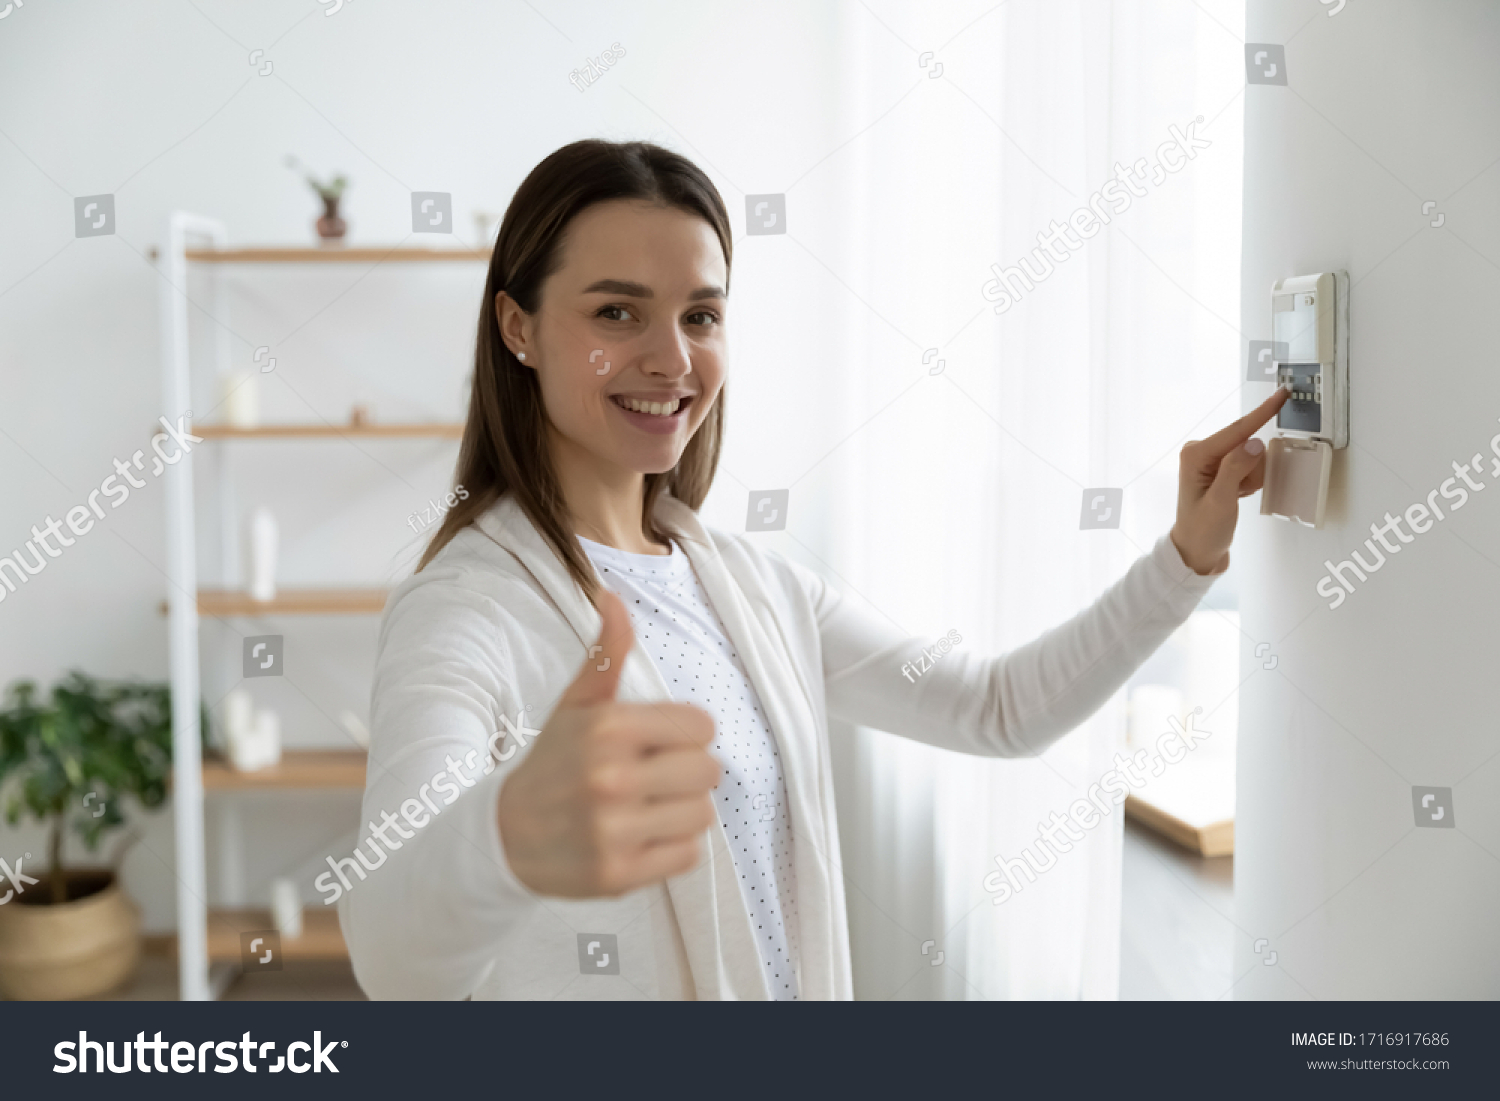 Smiling young woman use turn on smart home control panel on apartment wall, recommend good quality service show thumb up, happy millennial female client switch fire alarm or house security system #1716917686